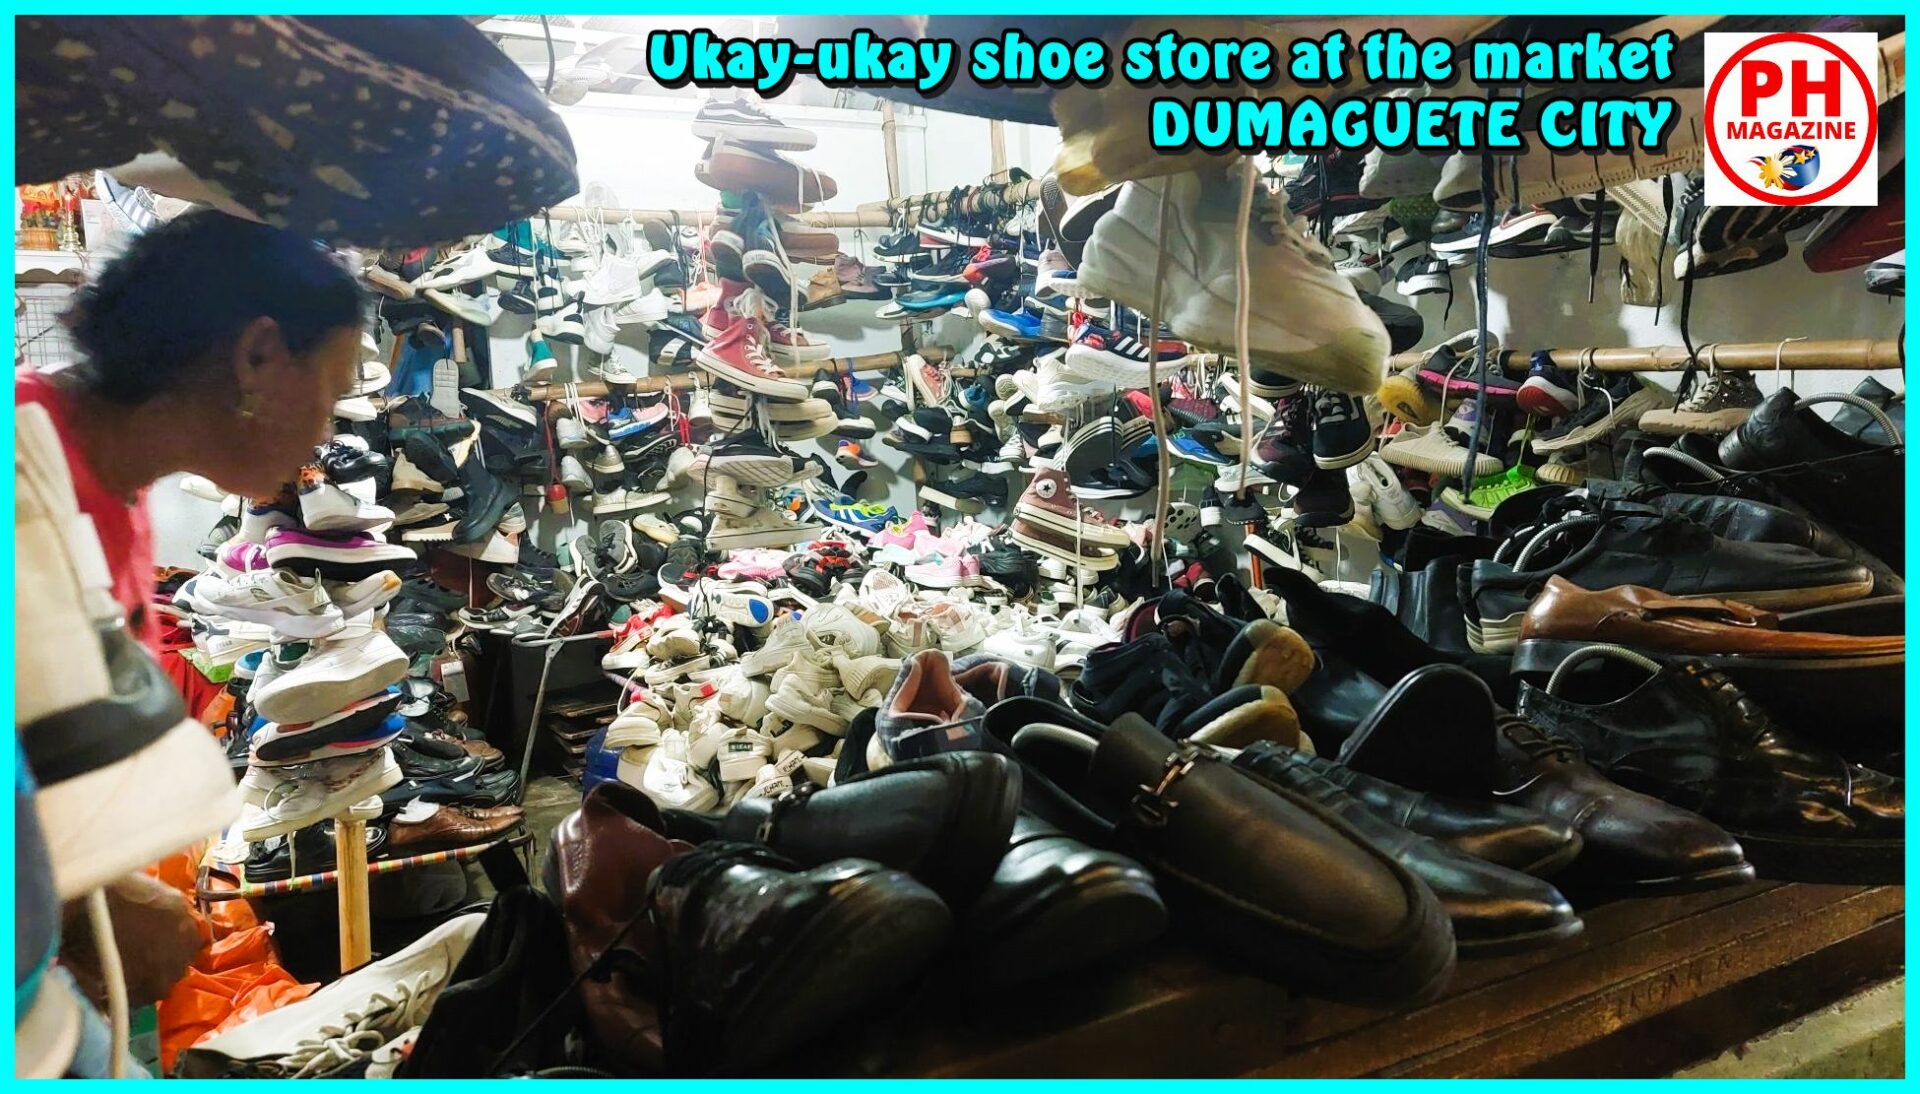 SIGHTS OF NEGROS - PHOTO OF THE DAY - Ukay-ukay shoe store at the market in Dumaguete City